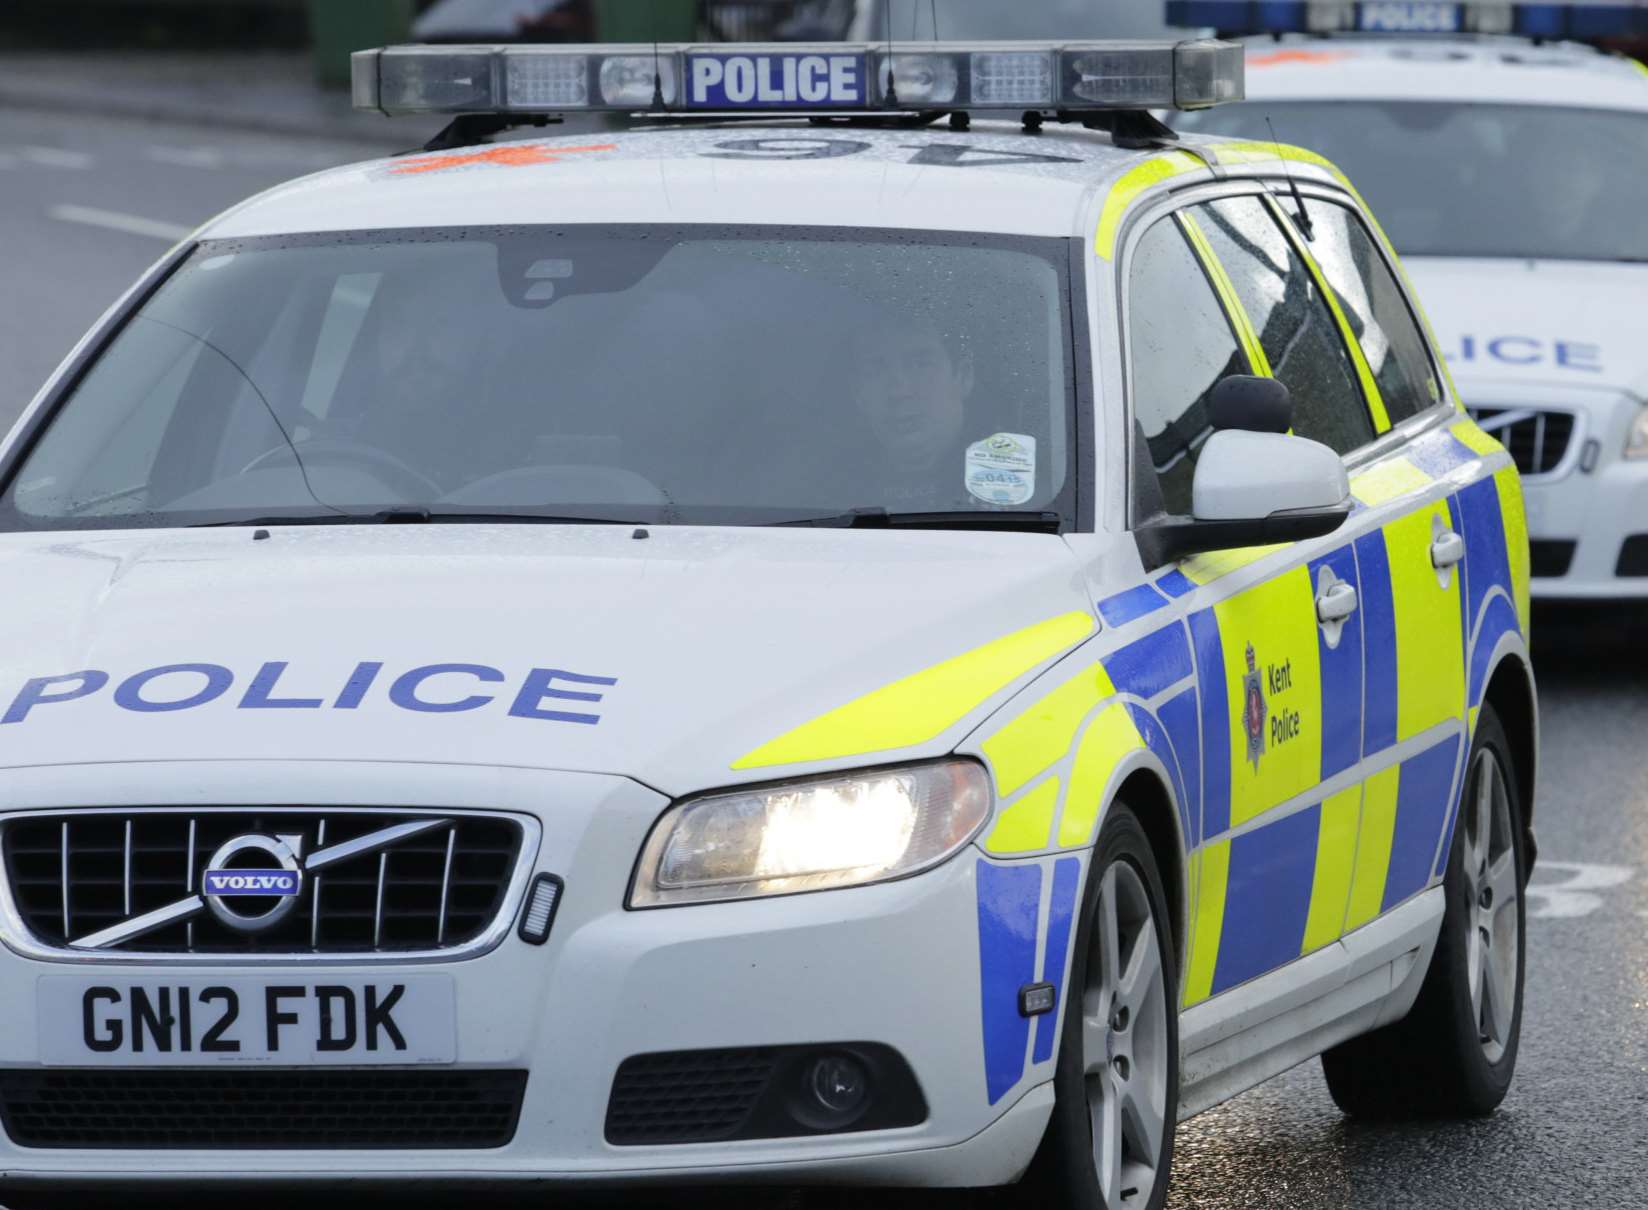 Police traced the man to a flat in Folkestone